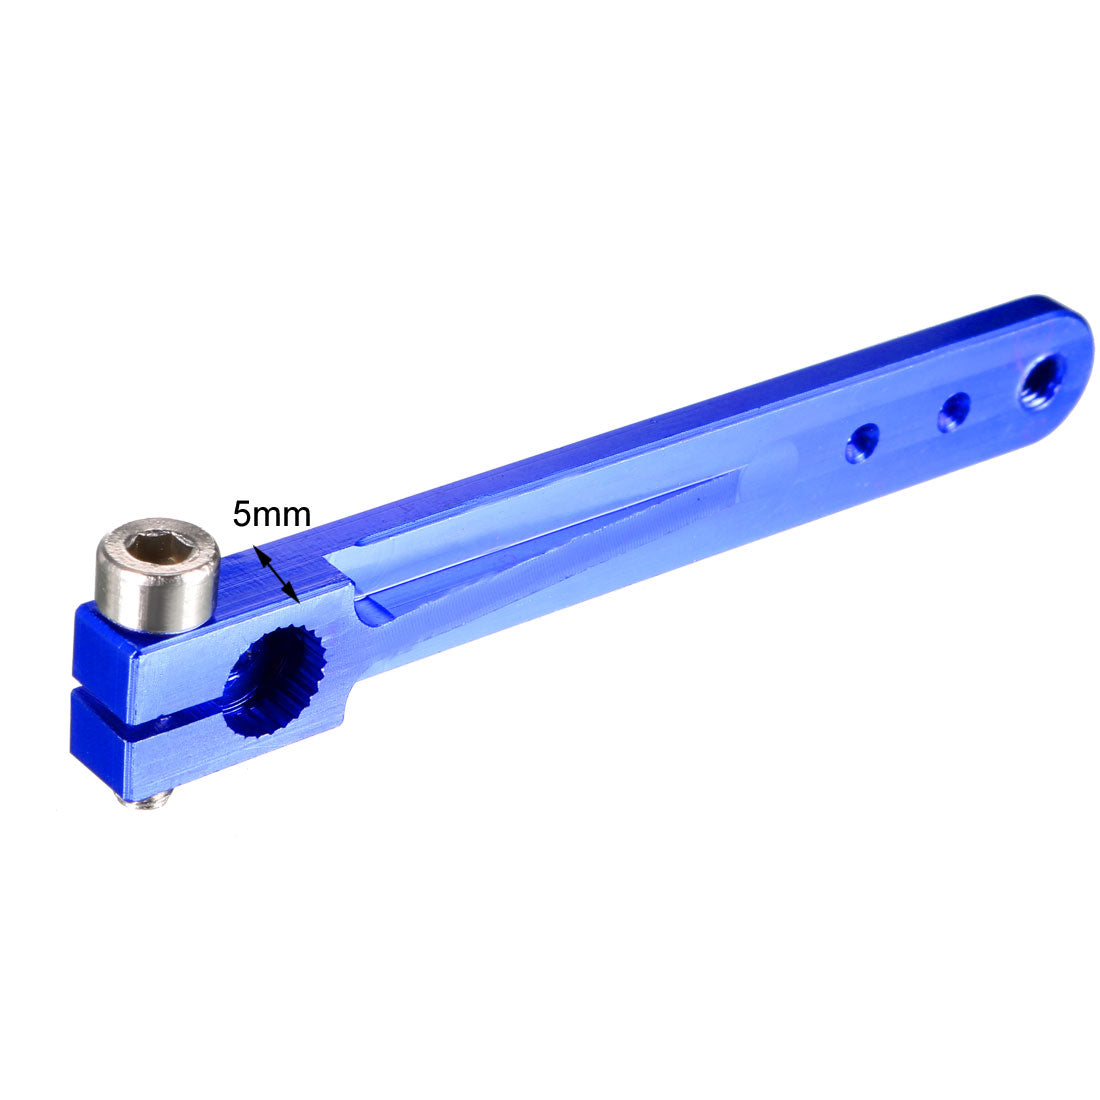 uxcell Uxcell Aluminum Servo Arms Single Arm 24T M3 Thread Blue, for 2 Inch